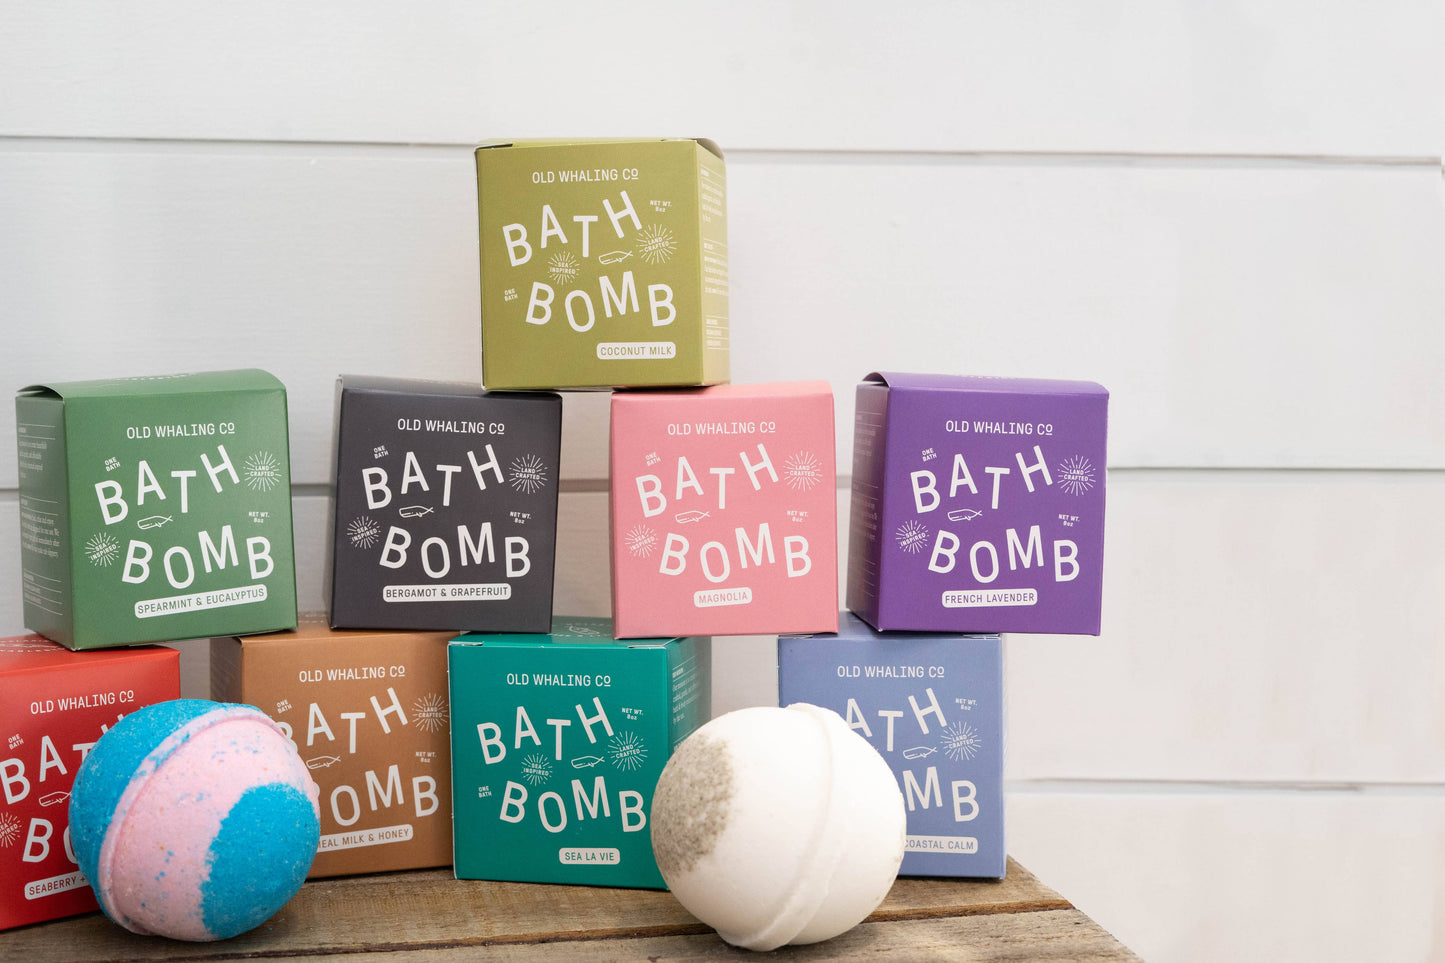 Old Whaling Co. - Coconut Milk Bath Bomb